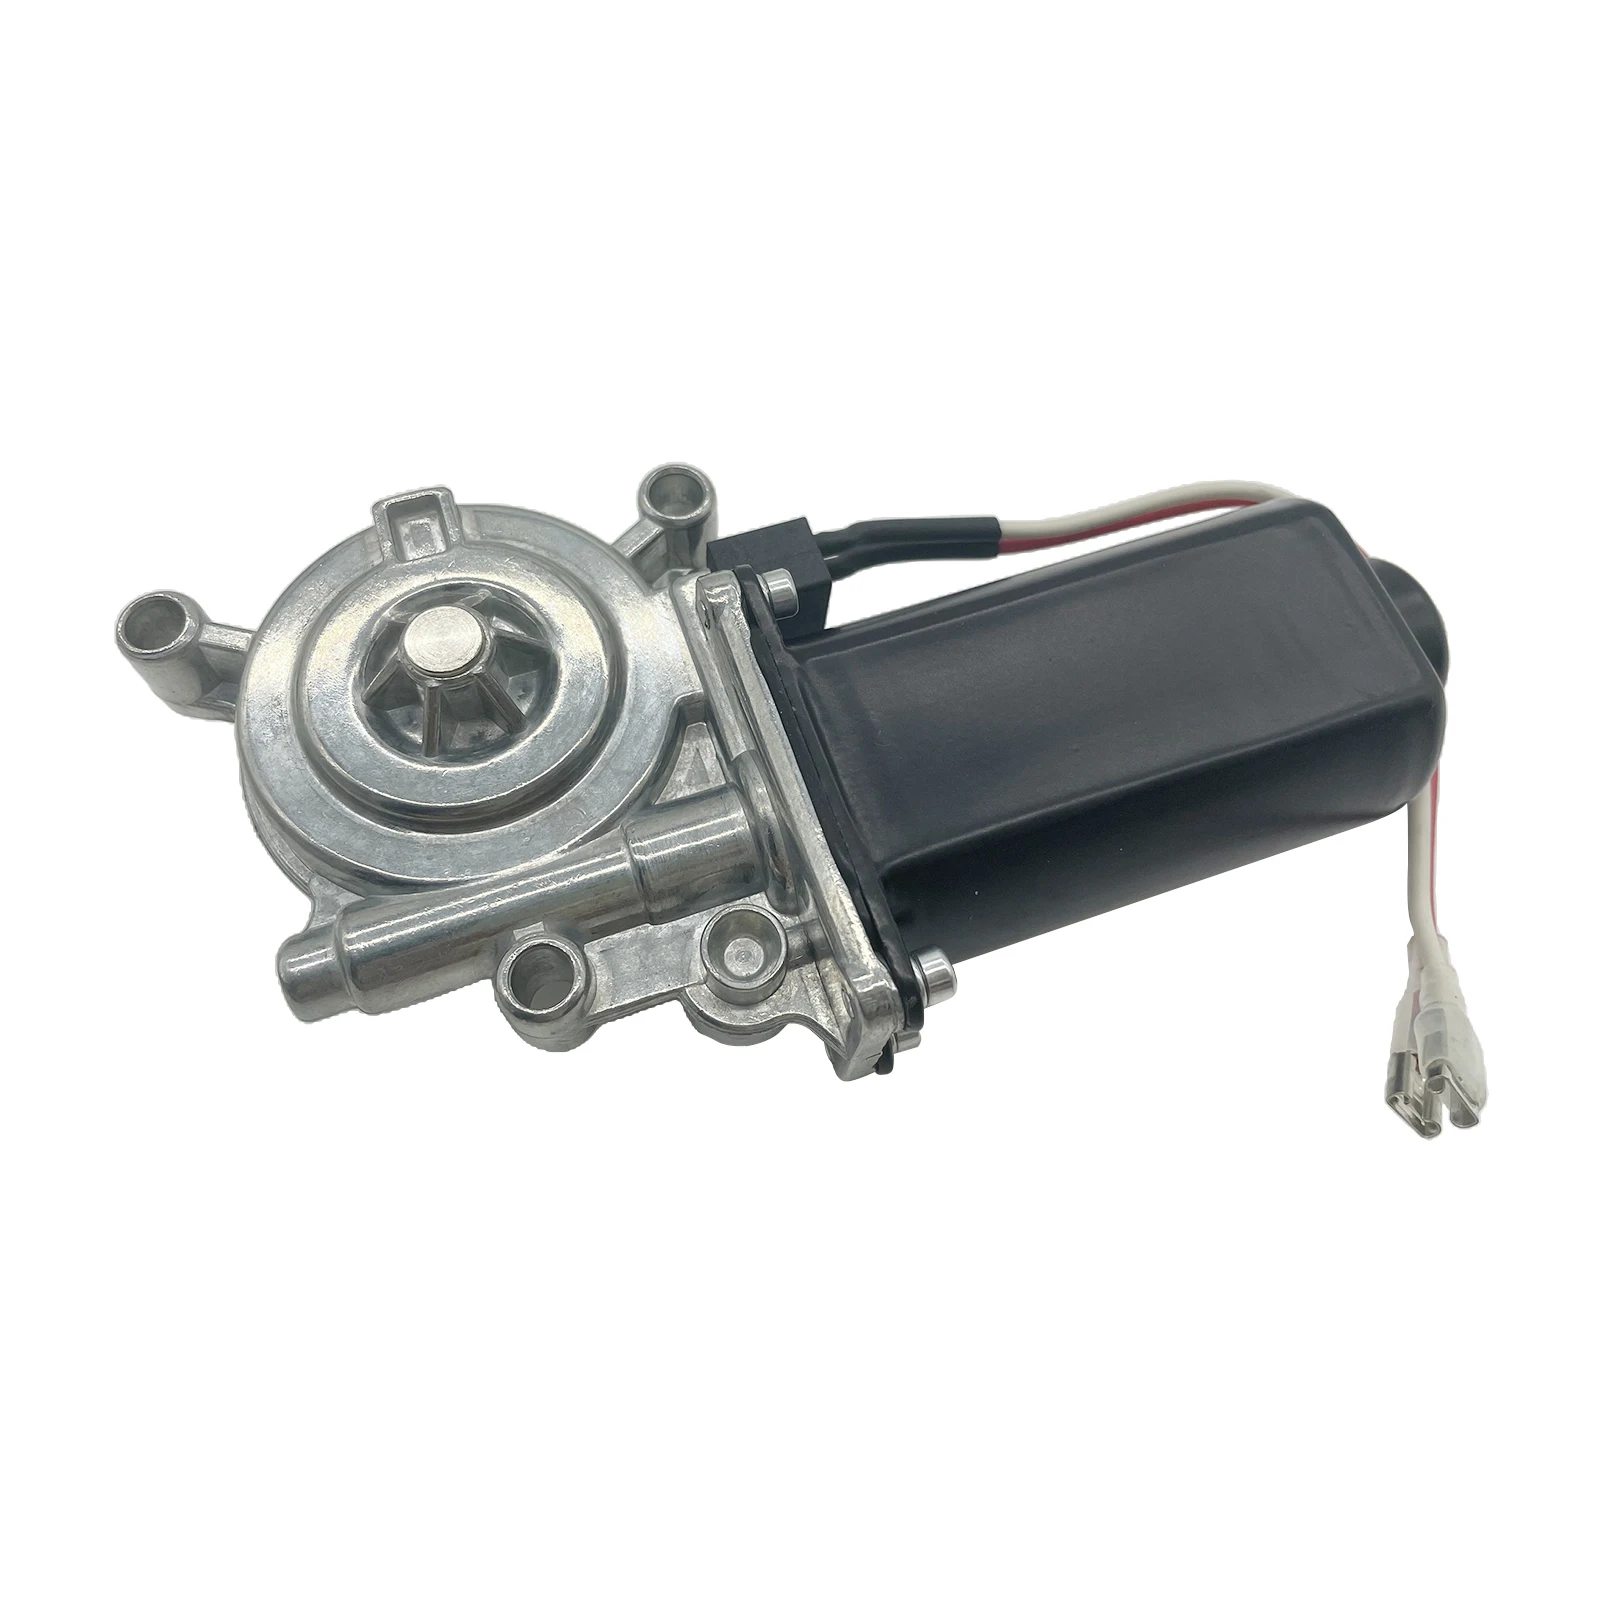 RV Power Awning Replacement Motor Assembly 12-Volt DC 75-RPM Compatible with Lippert 266149 373566